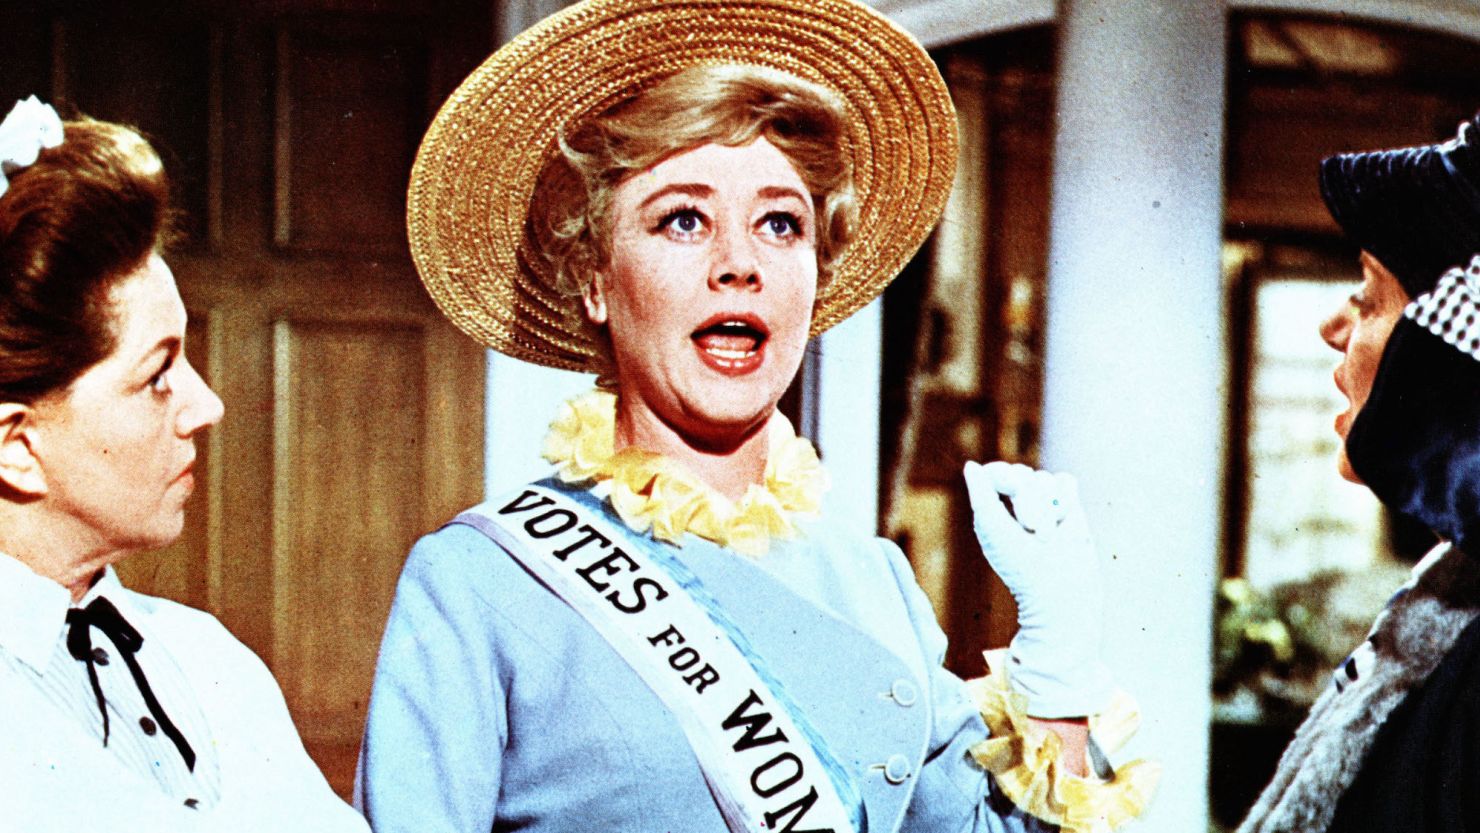 MARY POPPINS US 1964 HERMIONE BADDELEY GLYNIS JOHNS ELSA LANCHESTER. Photo by: Mary Evans/WALT DISNEY PICTURES / Ronald Grant/Everett Collection(10476999)